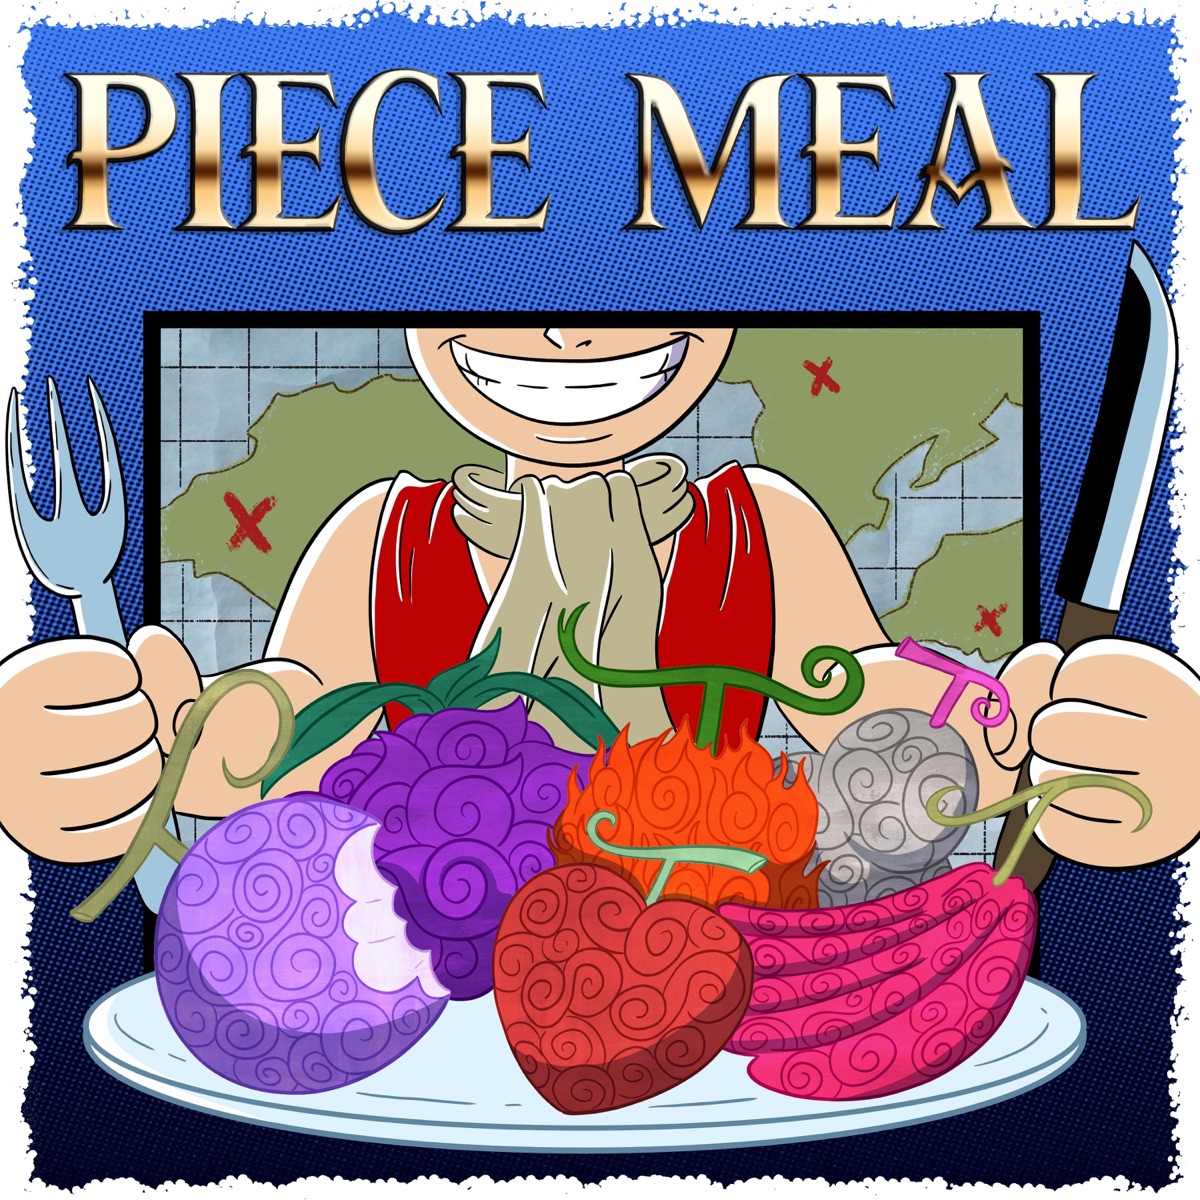 Piece Meal: A One Piece Book-Club Podcast – Podcast – Podtail